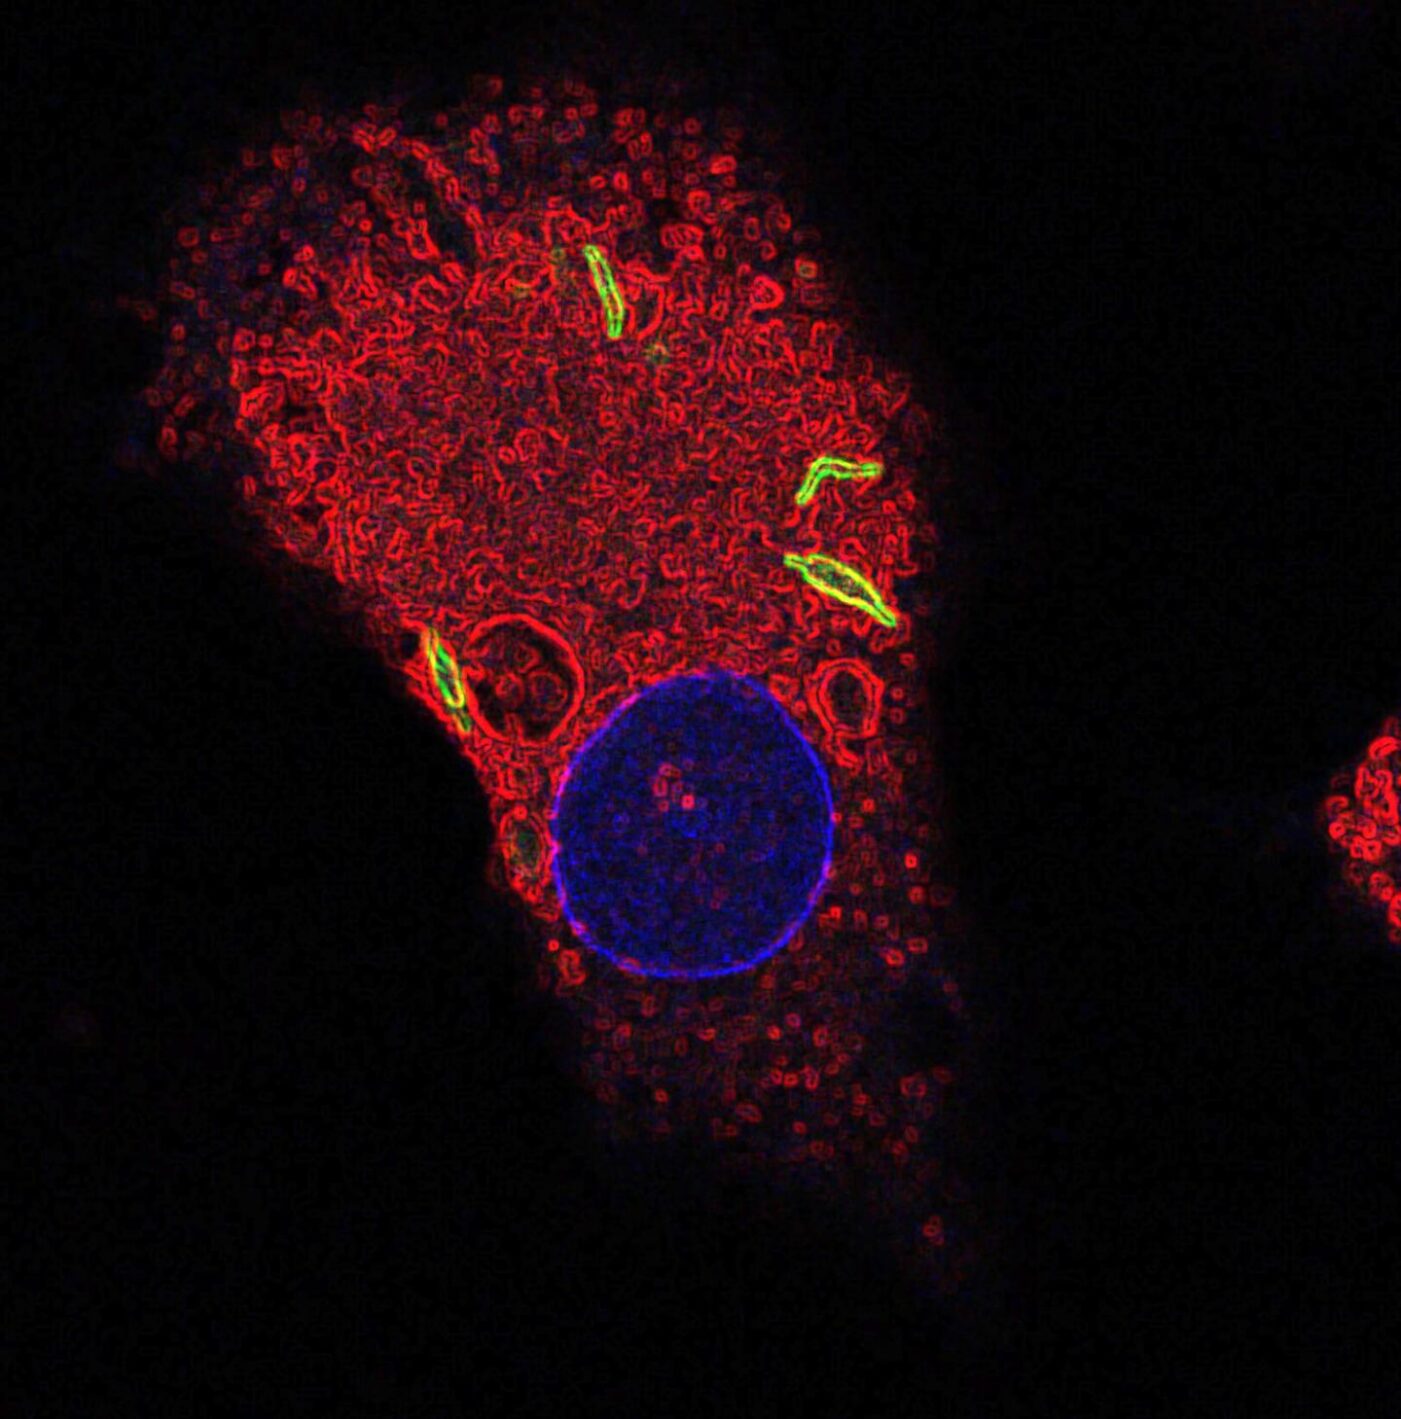 Image of a macrophage labeled for the nucleus (blue), fused lysosomes and phagosomes (red), and TB bacteria (green). [Susanne Herbst/Francis Crick Institute]